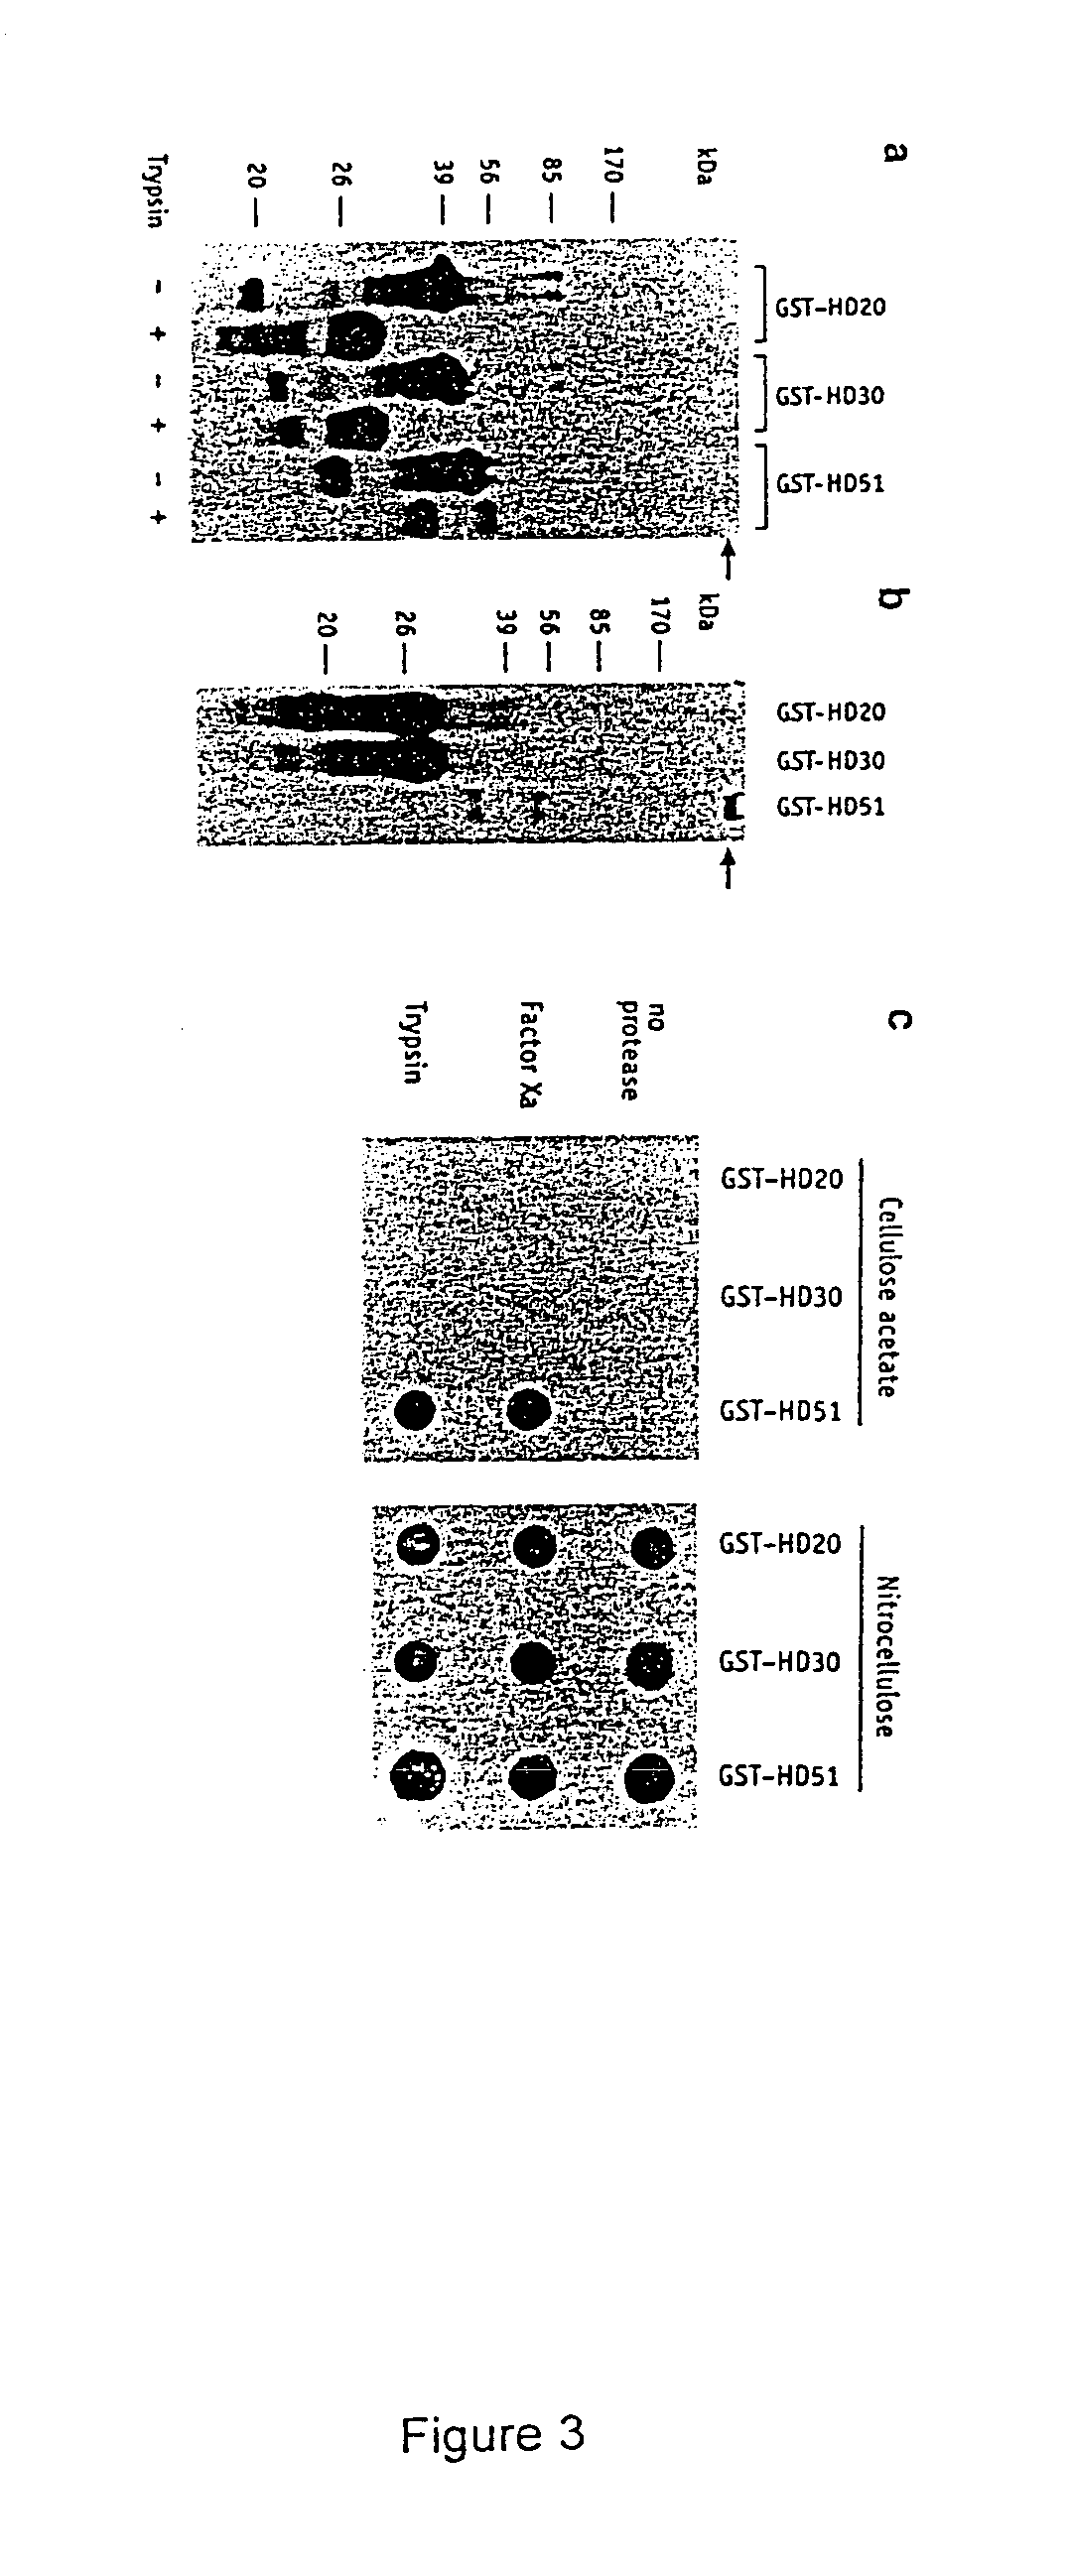 Composition and method for the detection of diseases associated with amyloid-like fibril or protein aggregate formation